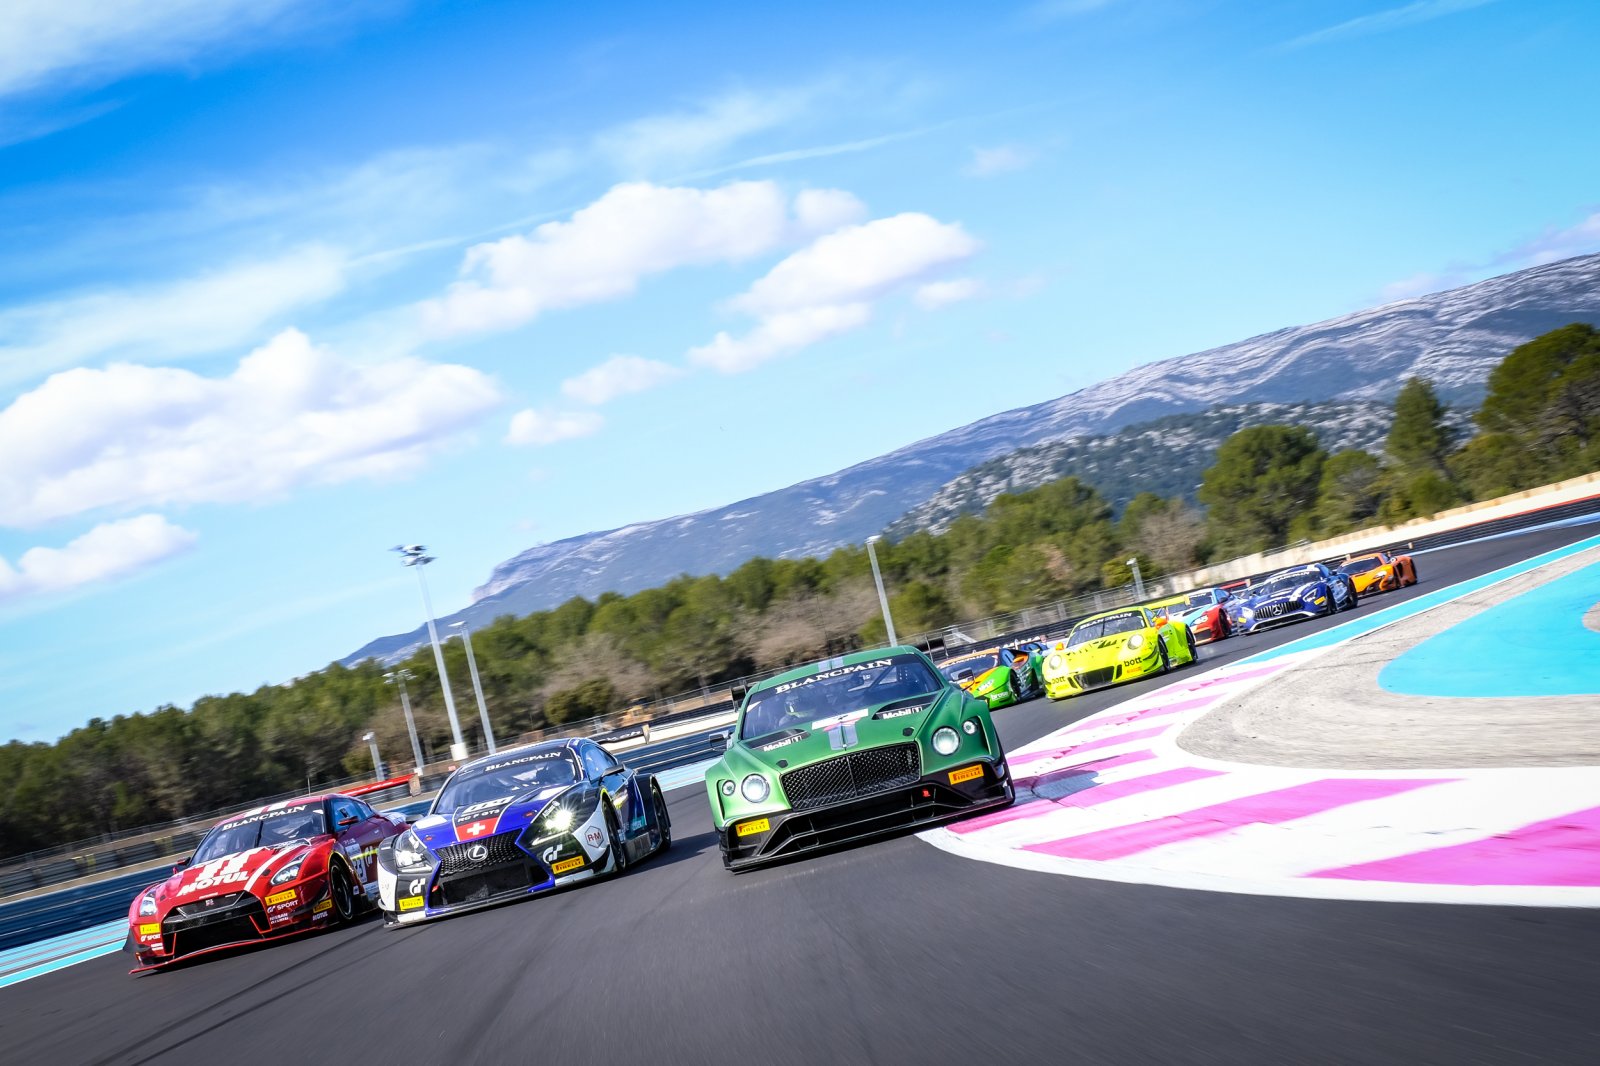 Blancpain GT Series announces full 2018 entry list with 50 cars representing 11 manufacturers